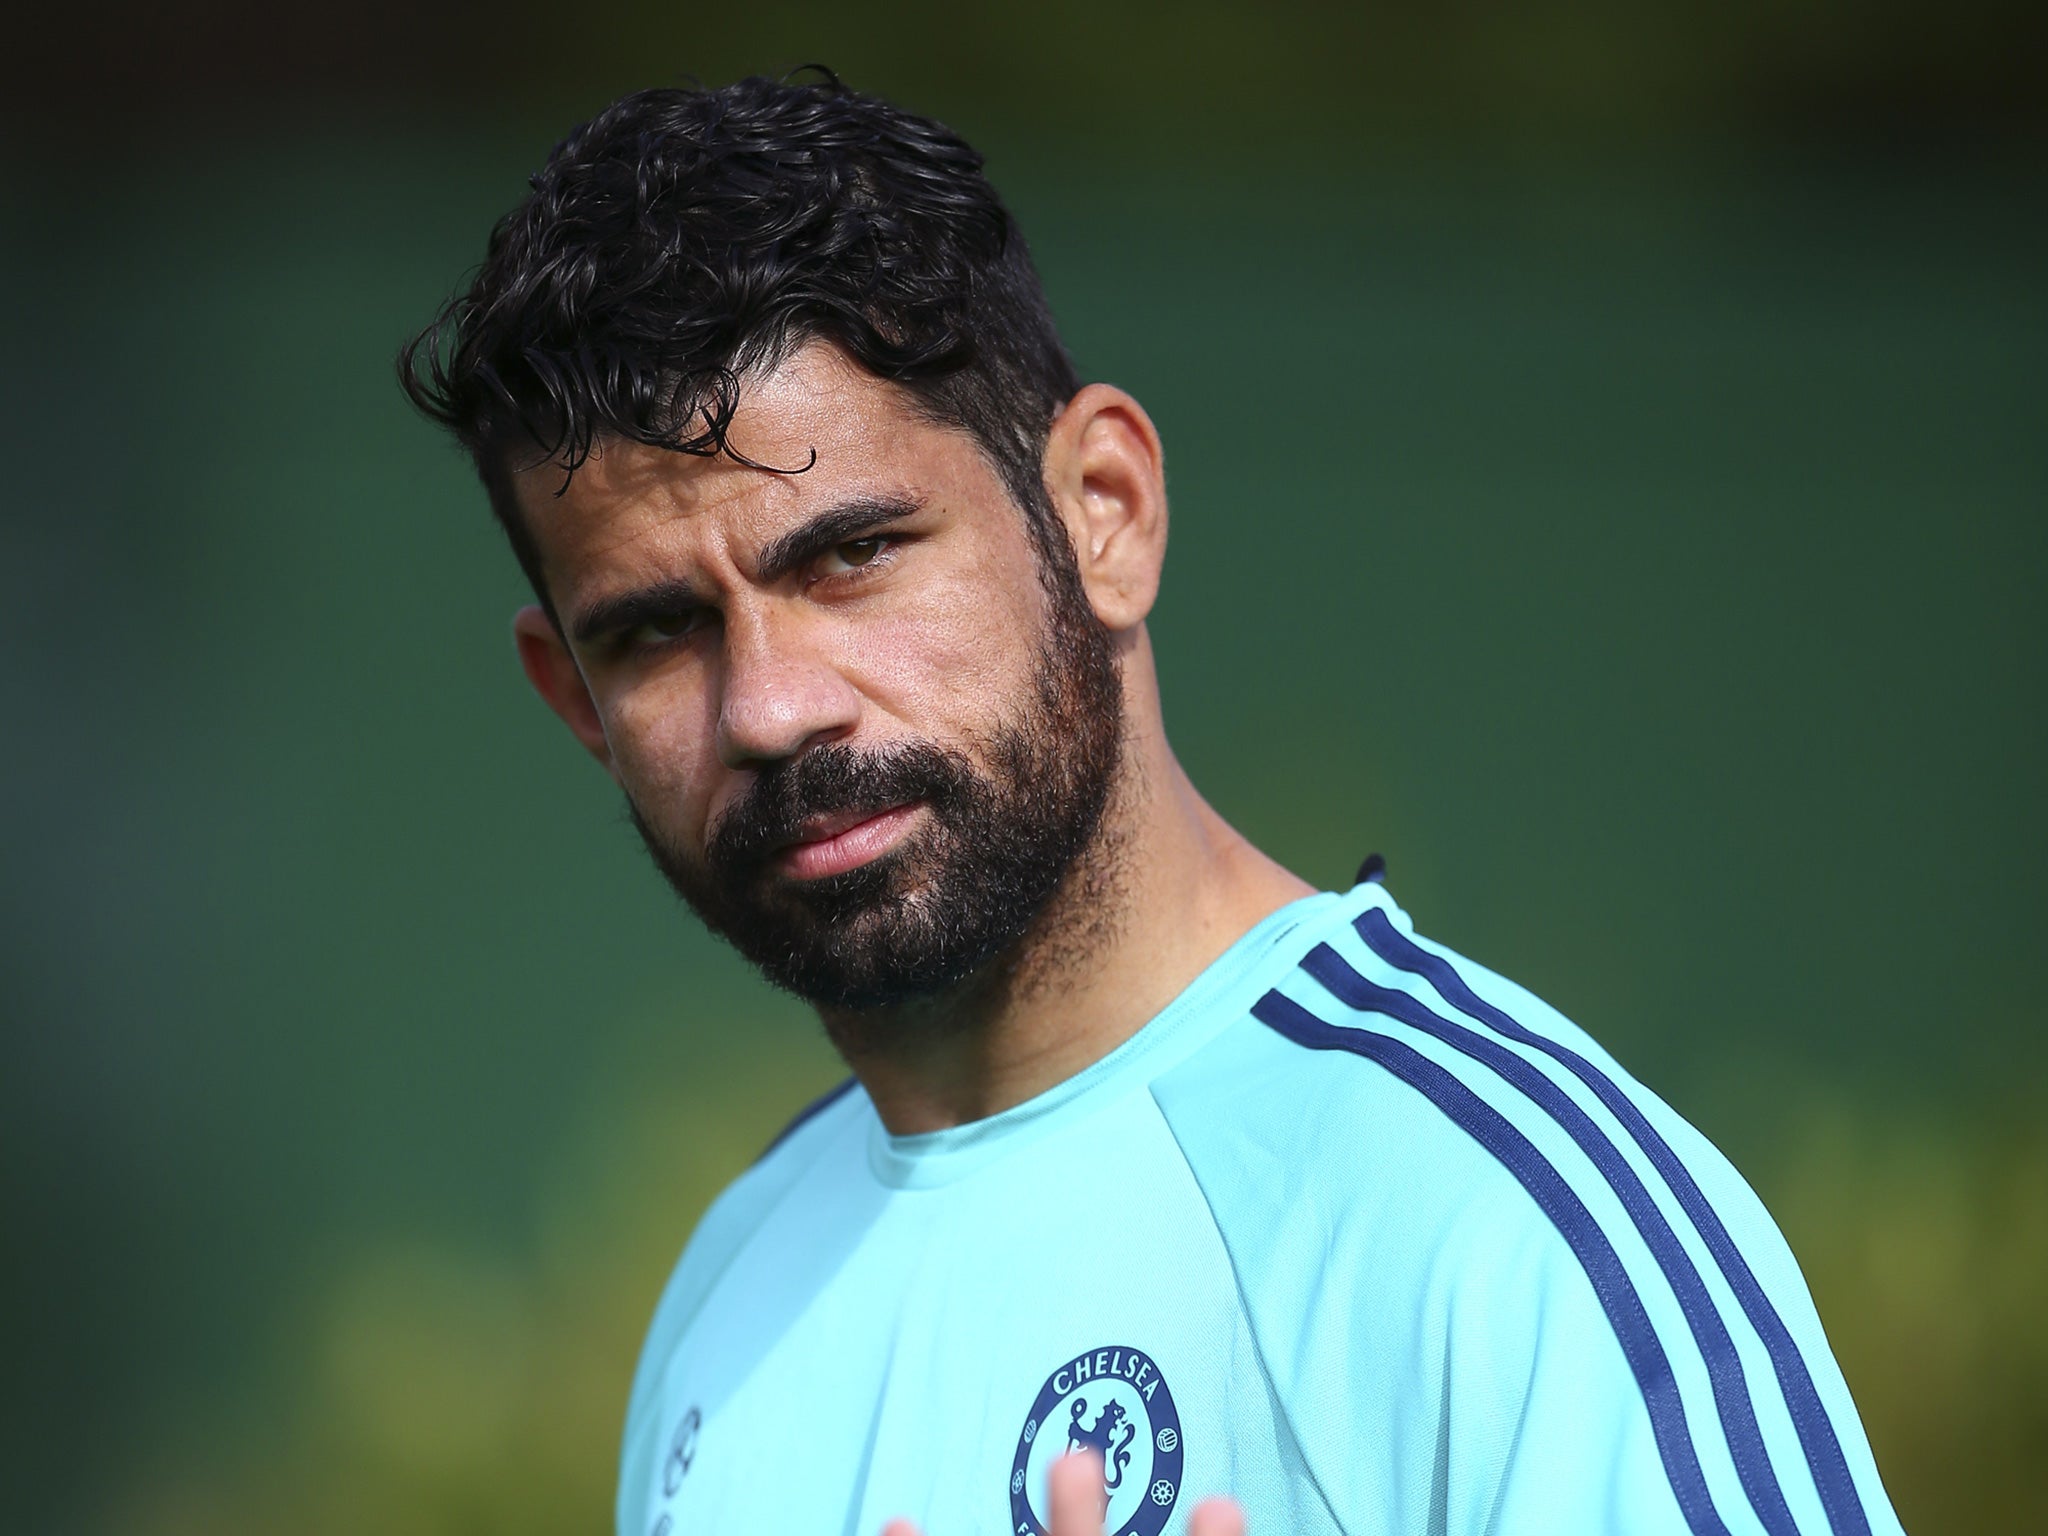 The Spain coach Vicente del Bosque said ‘I did not like what I saw,’ about Diego Costa